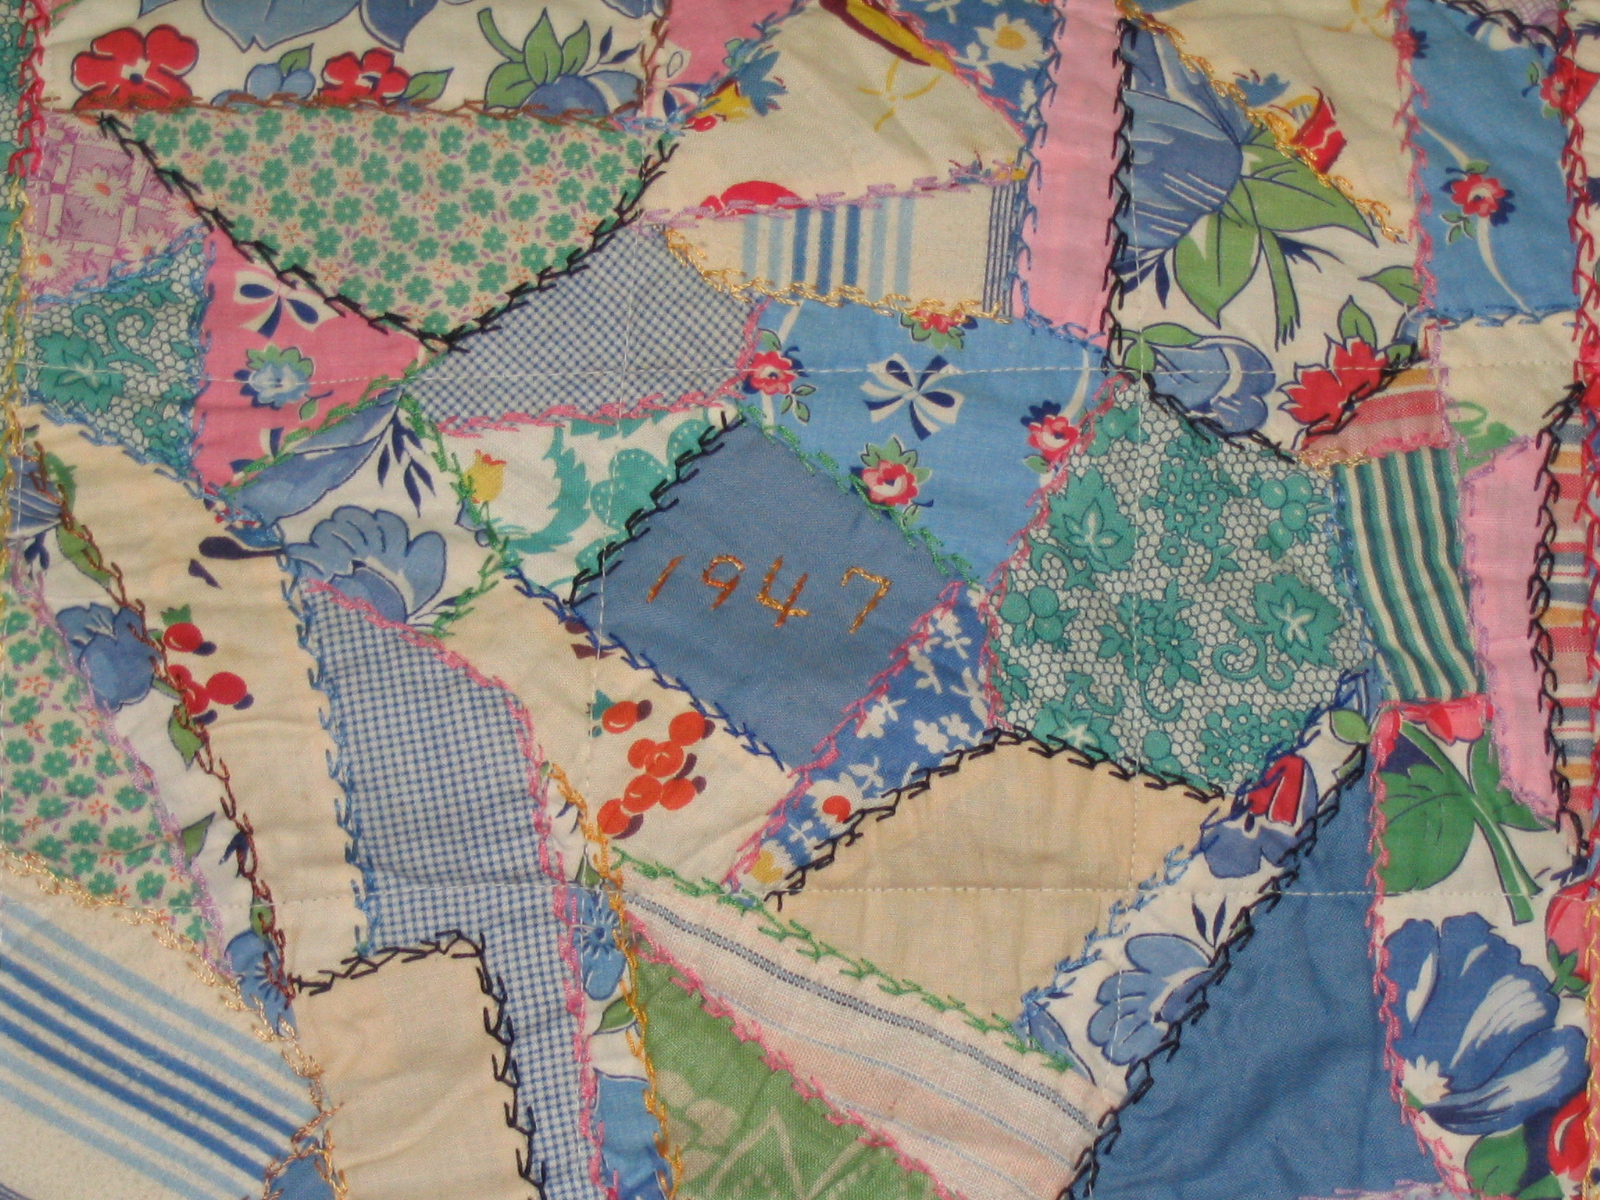 Close up of center of quilt